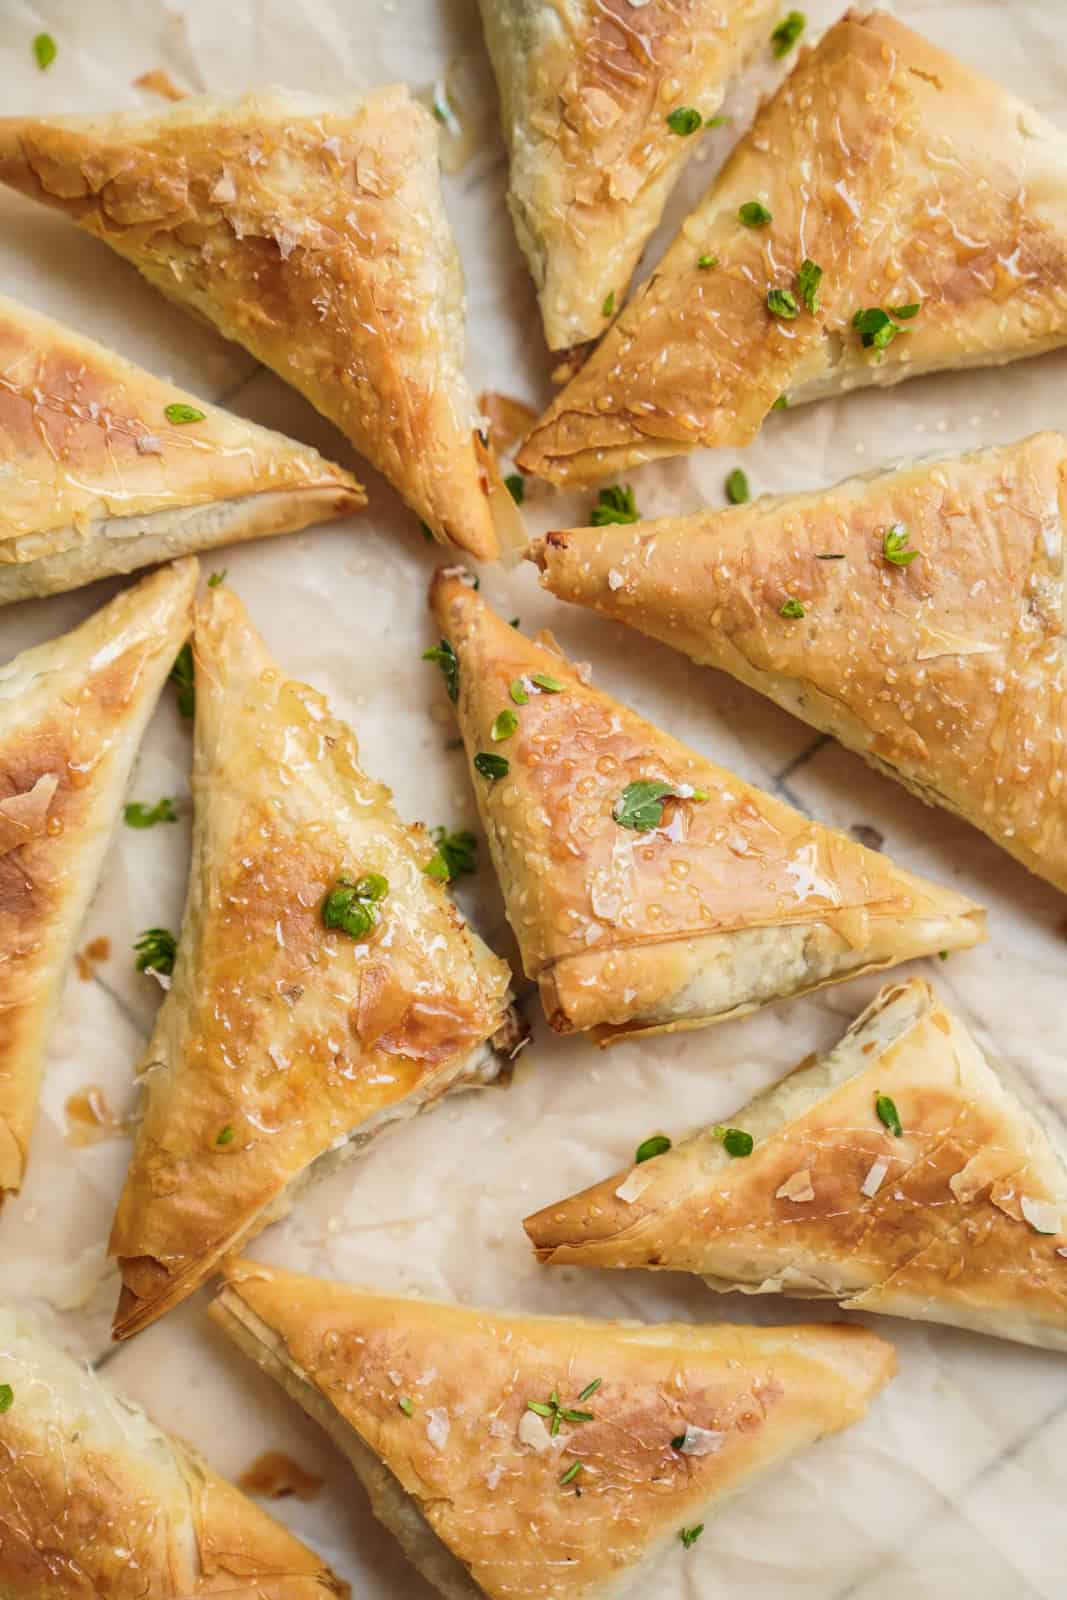 Spinach pies cut in triangles on a baking sheet